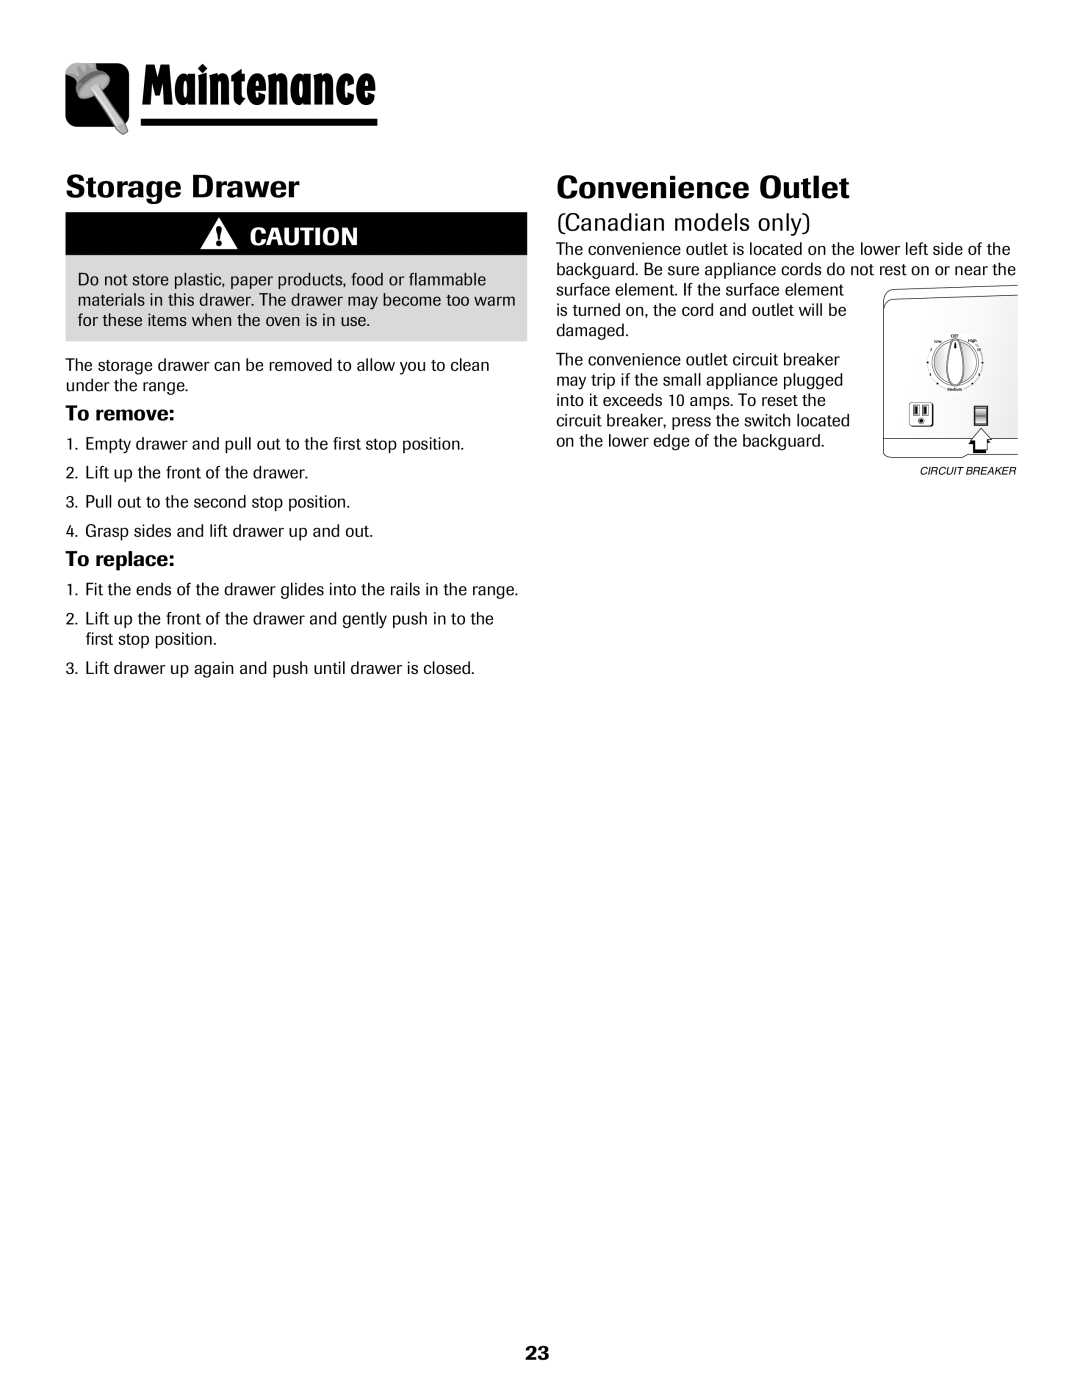 Maytag Range Storage Drawer, Convenience Outlet, Canadian models only, Maintenance, To remove, To replace 